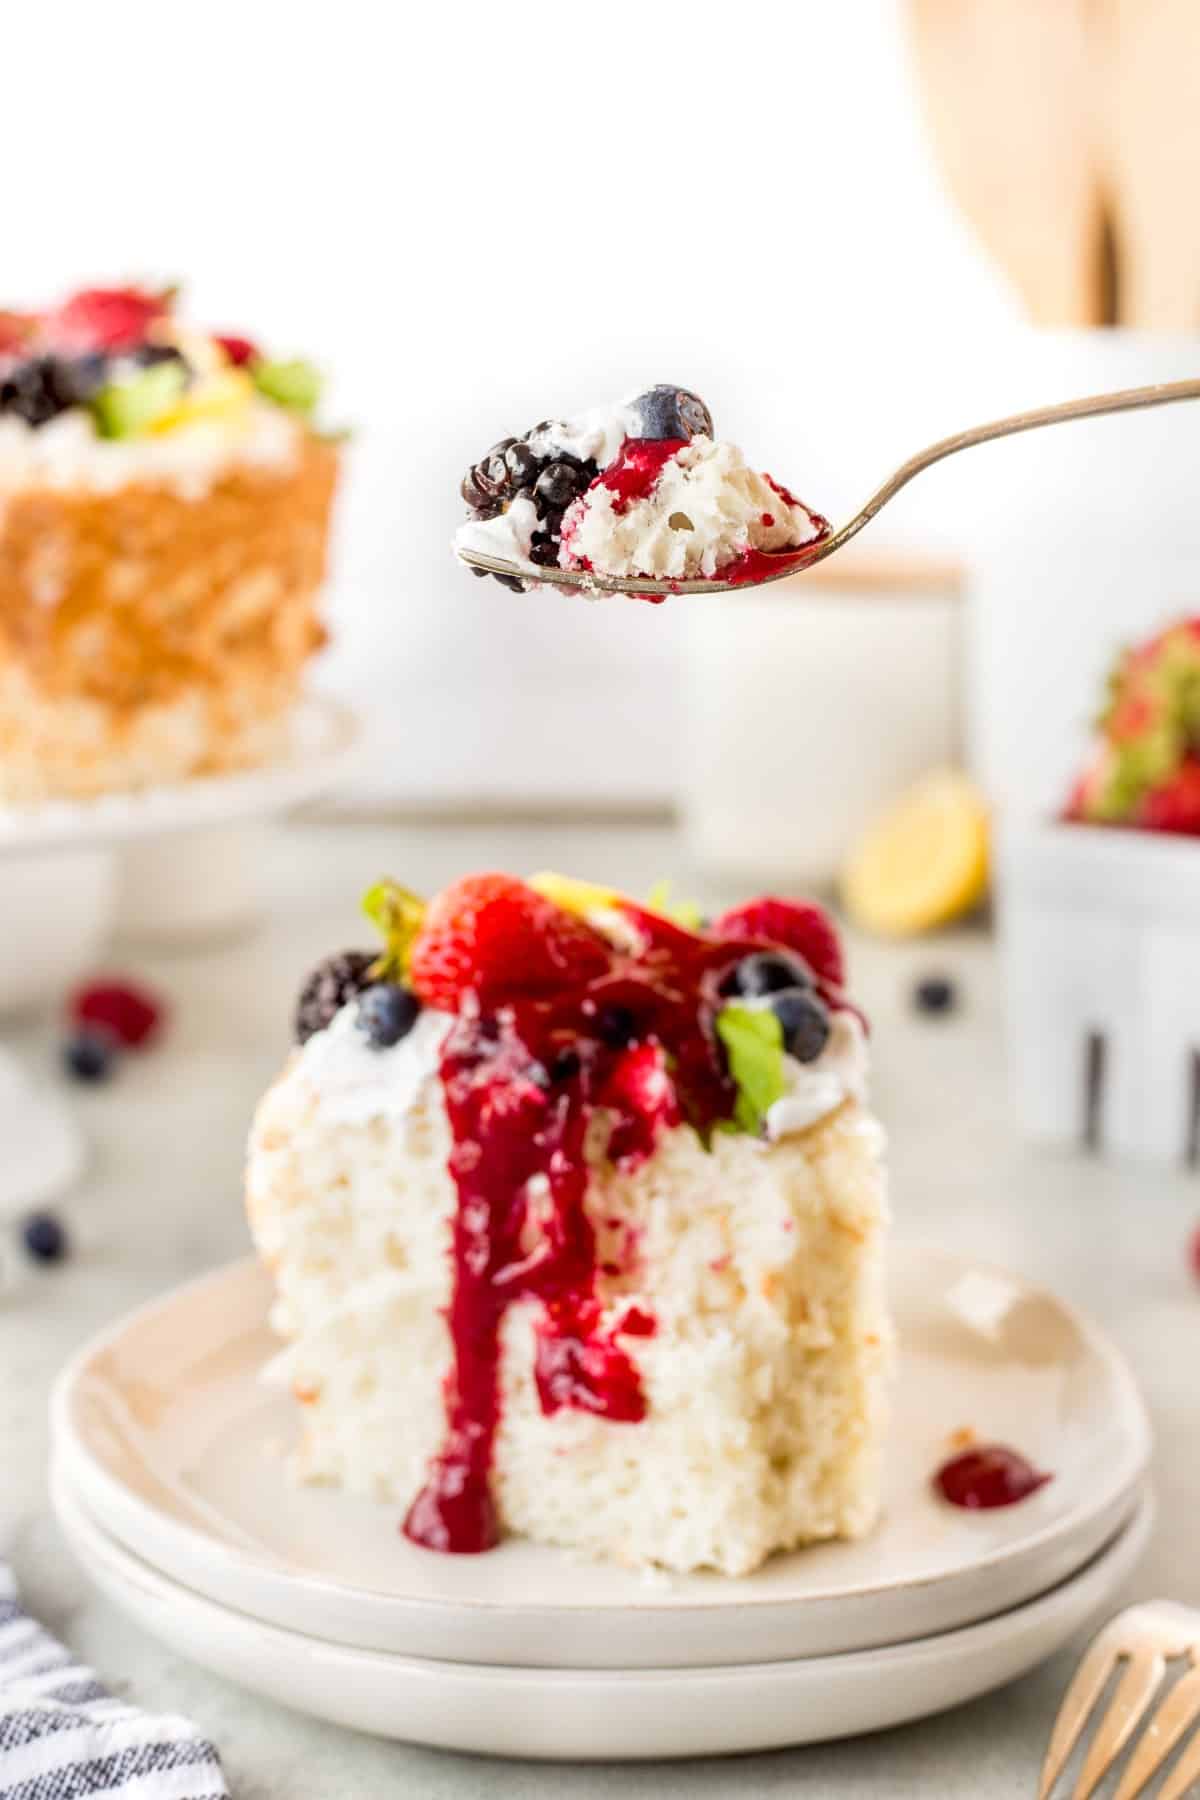  A forkful of cake and berries